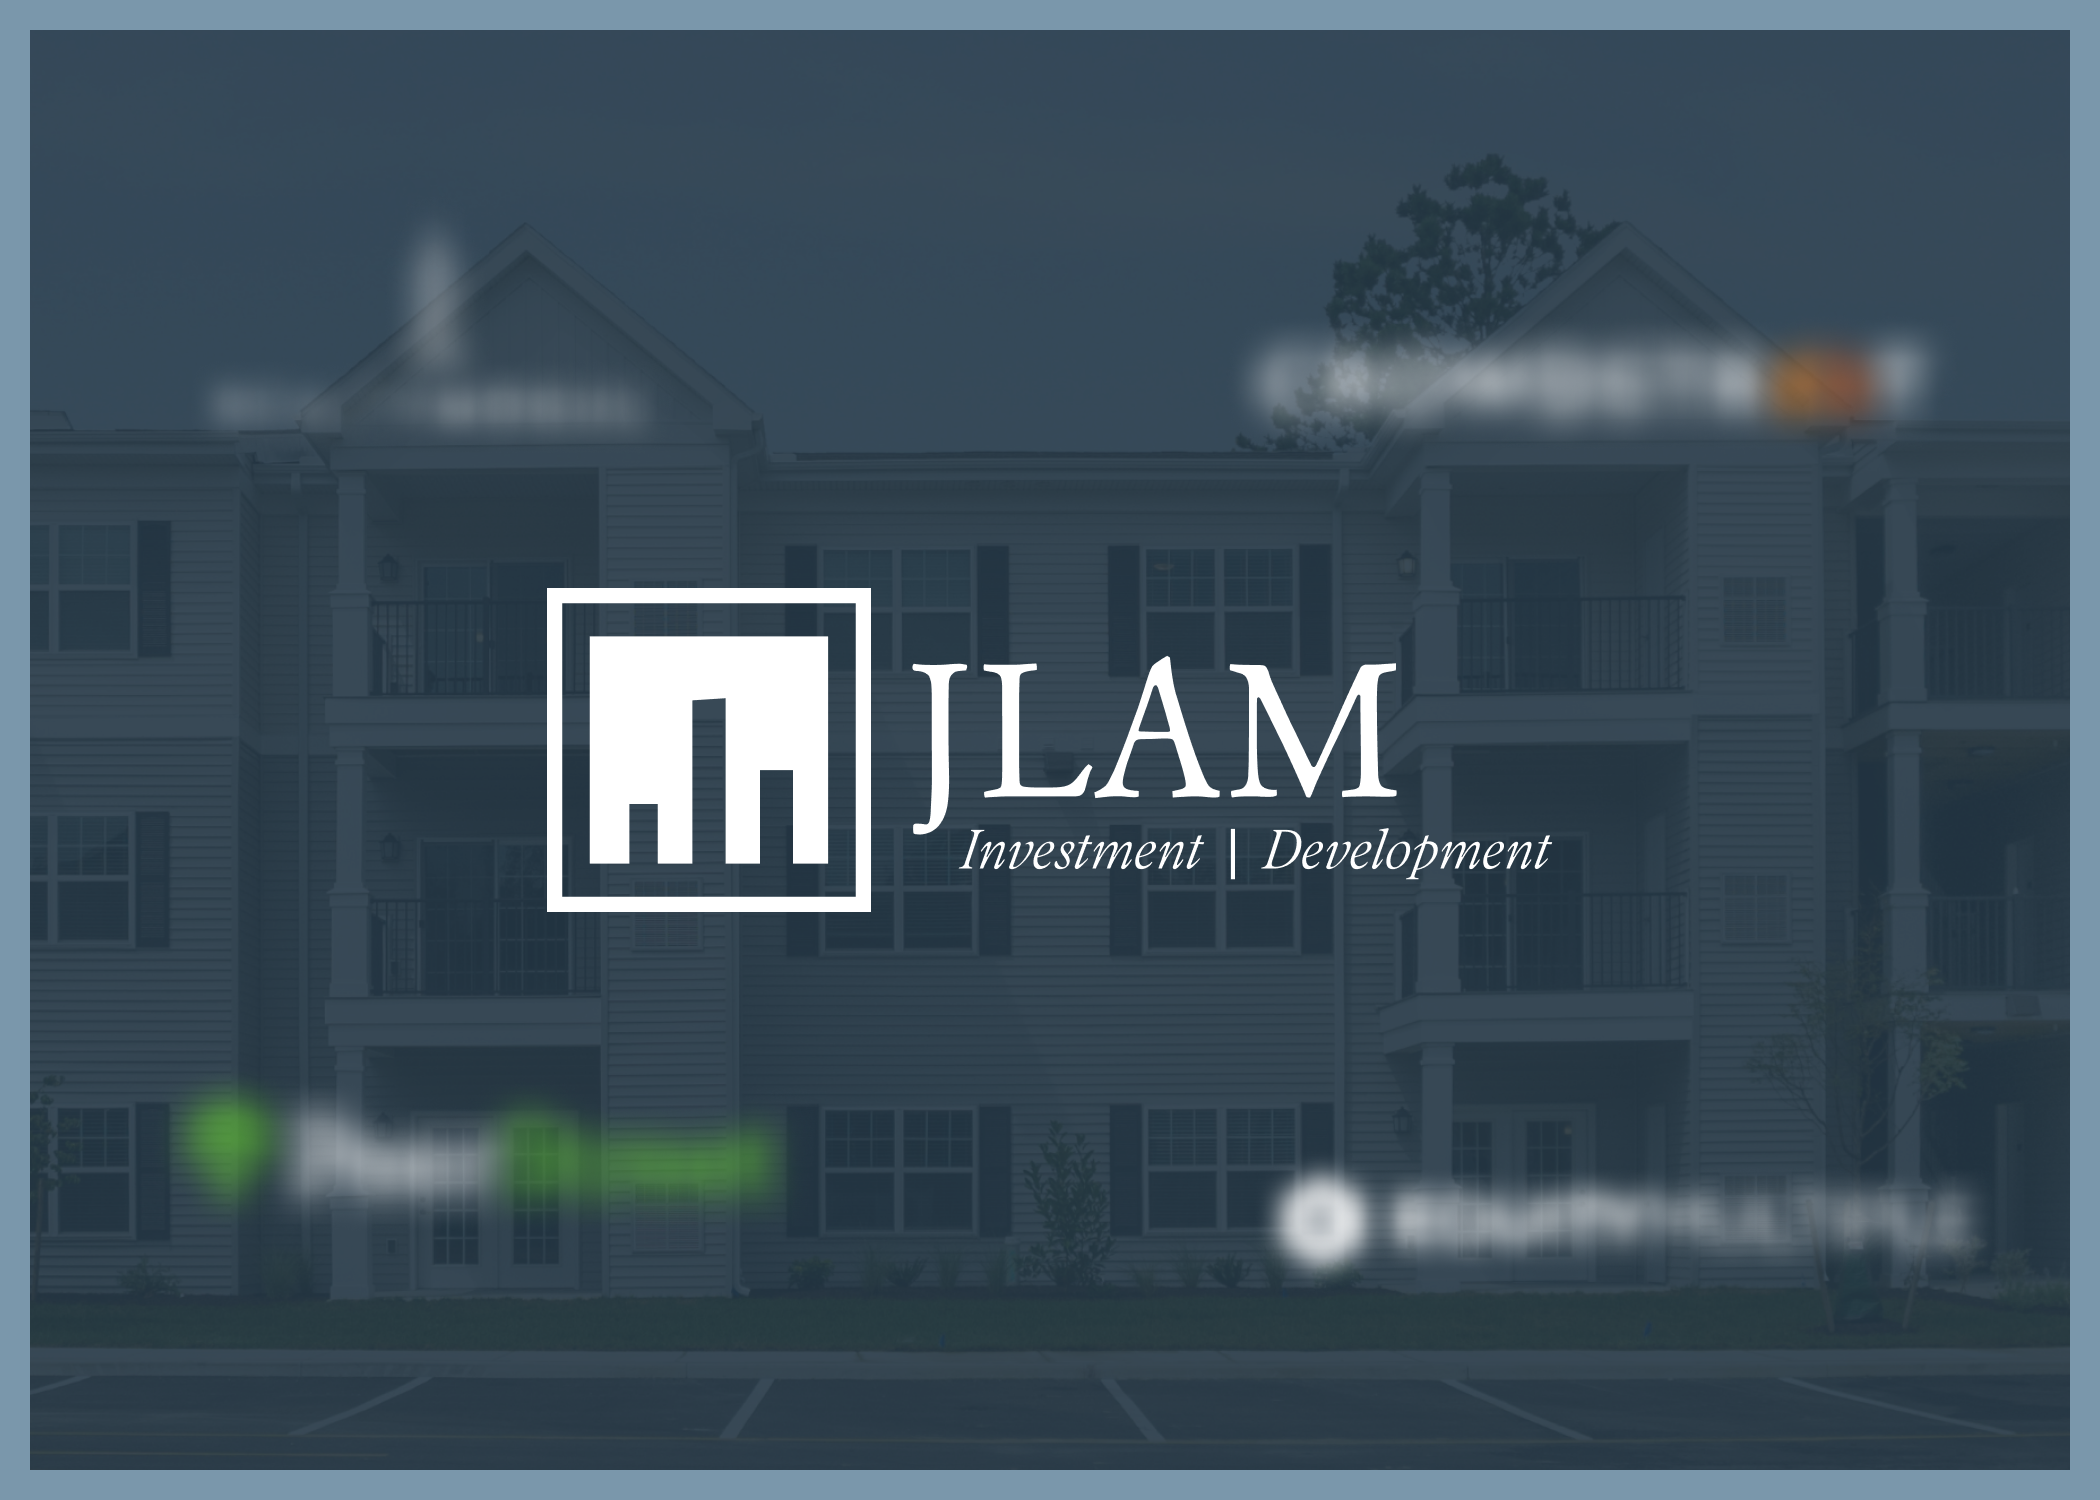 How JLAM is different than real estate investing platforms